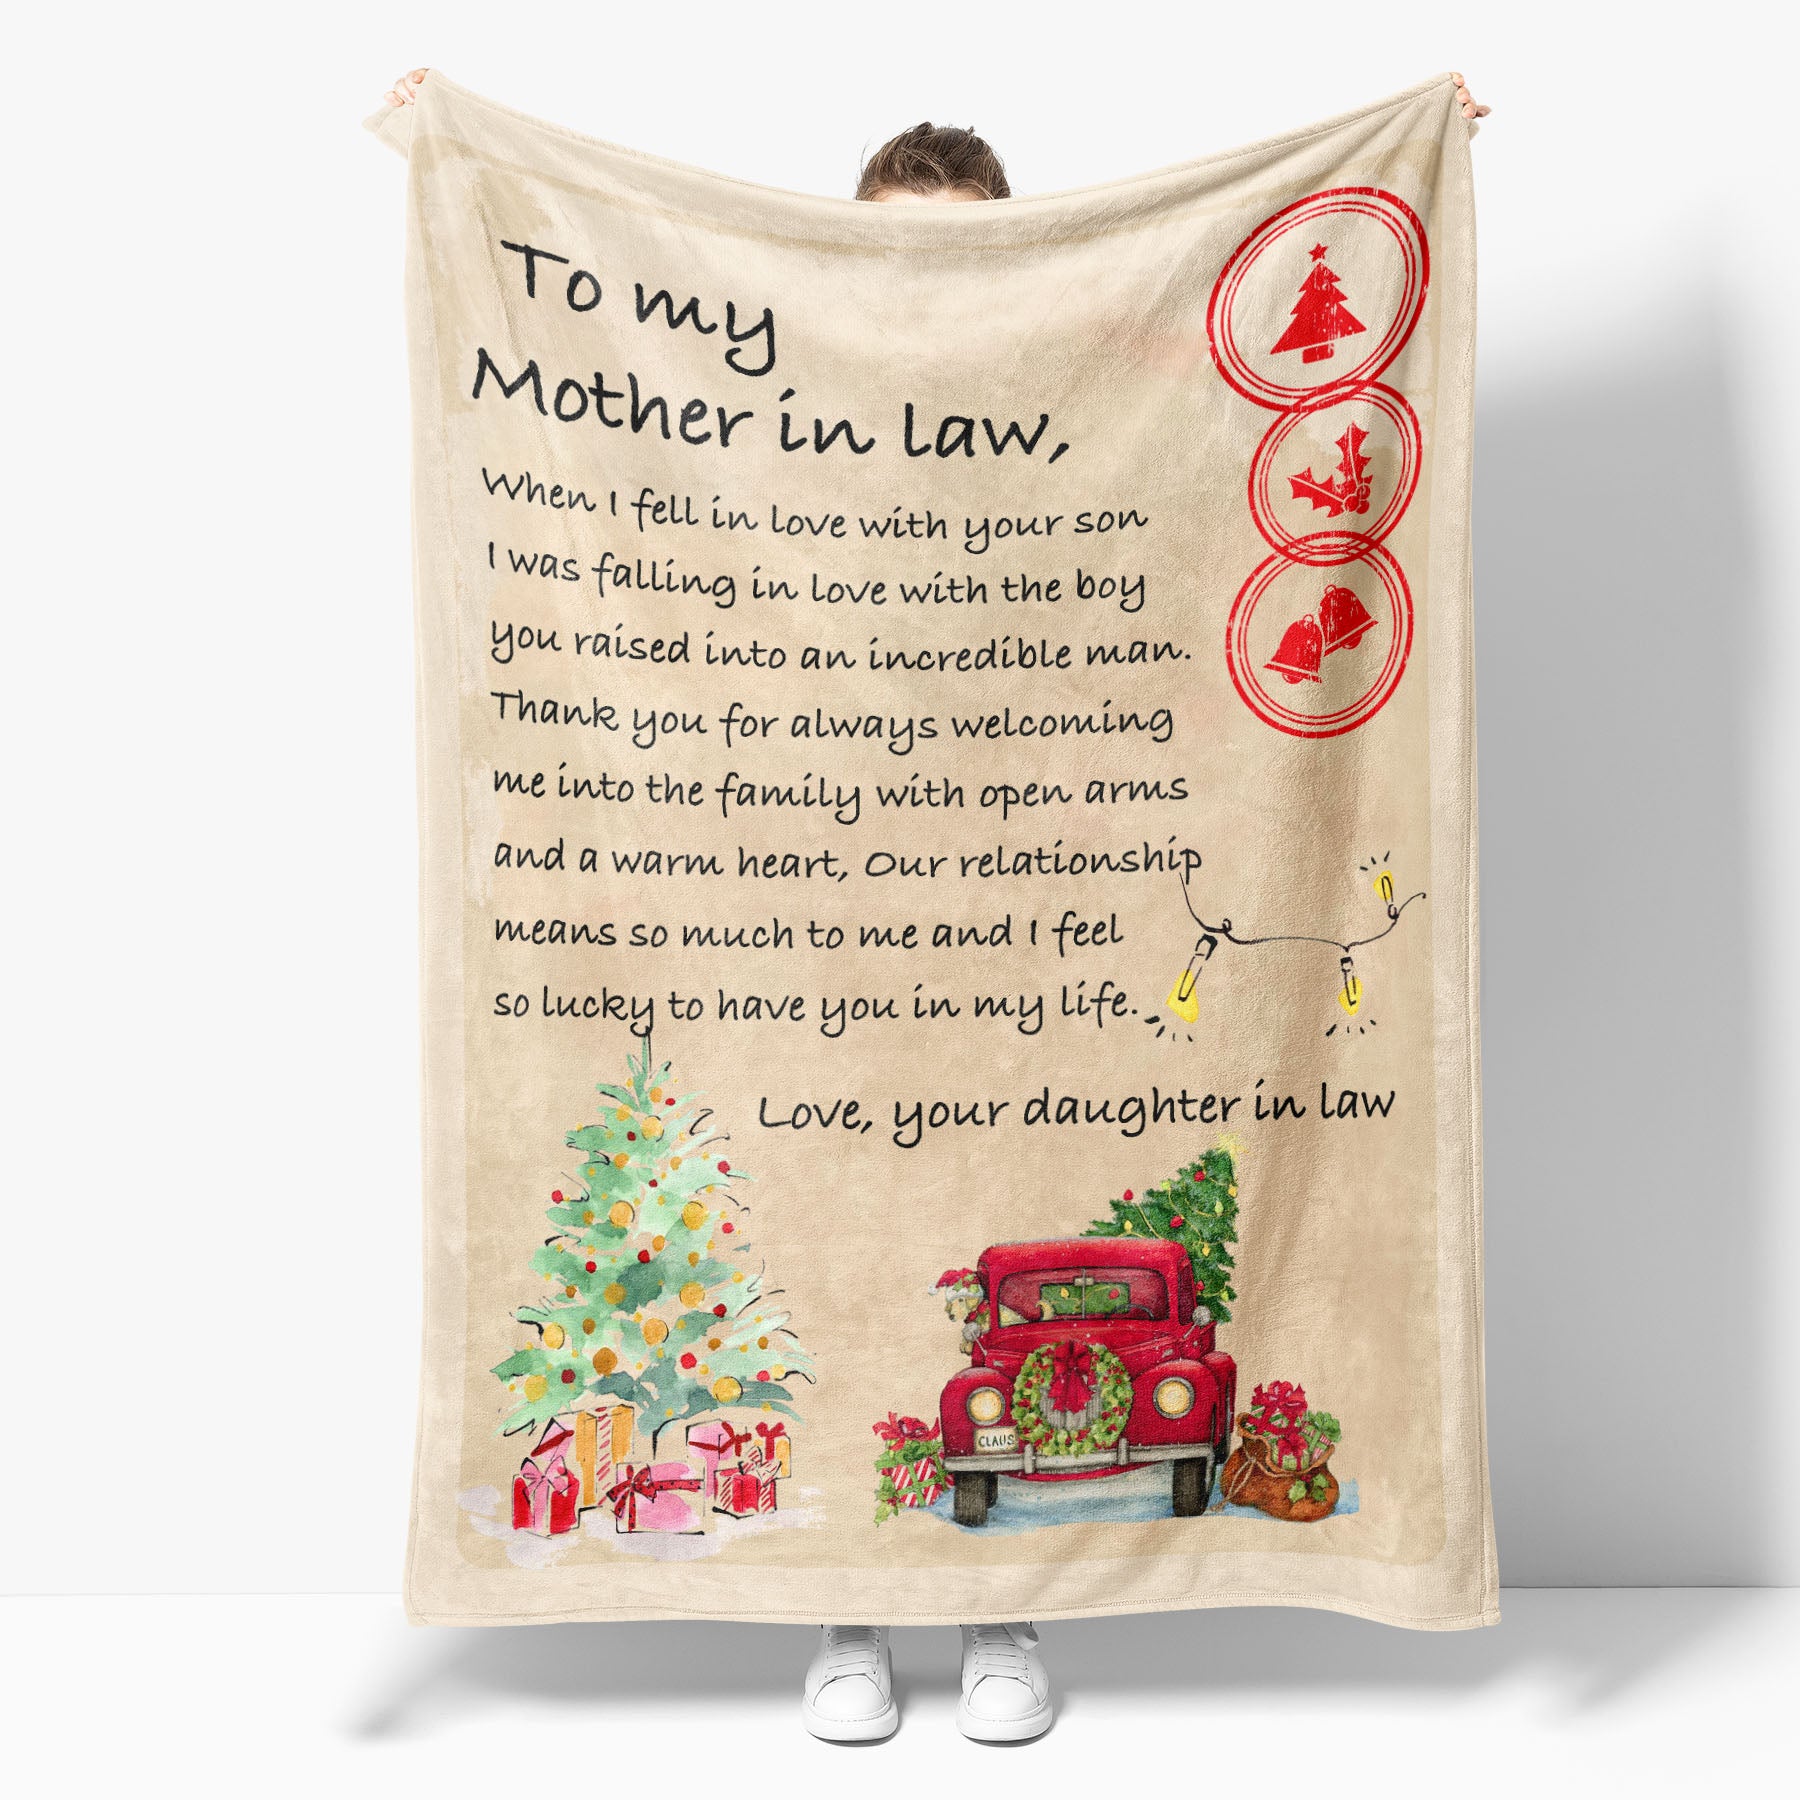 Christmas Blanket Gift Ideas for Mother in Law When I Fell in Love with your Son The Boy You Raised into Daughter in Law 201126 - Fleece